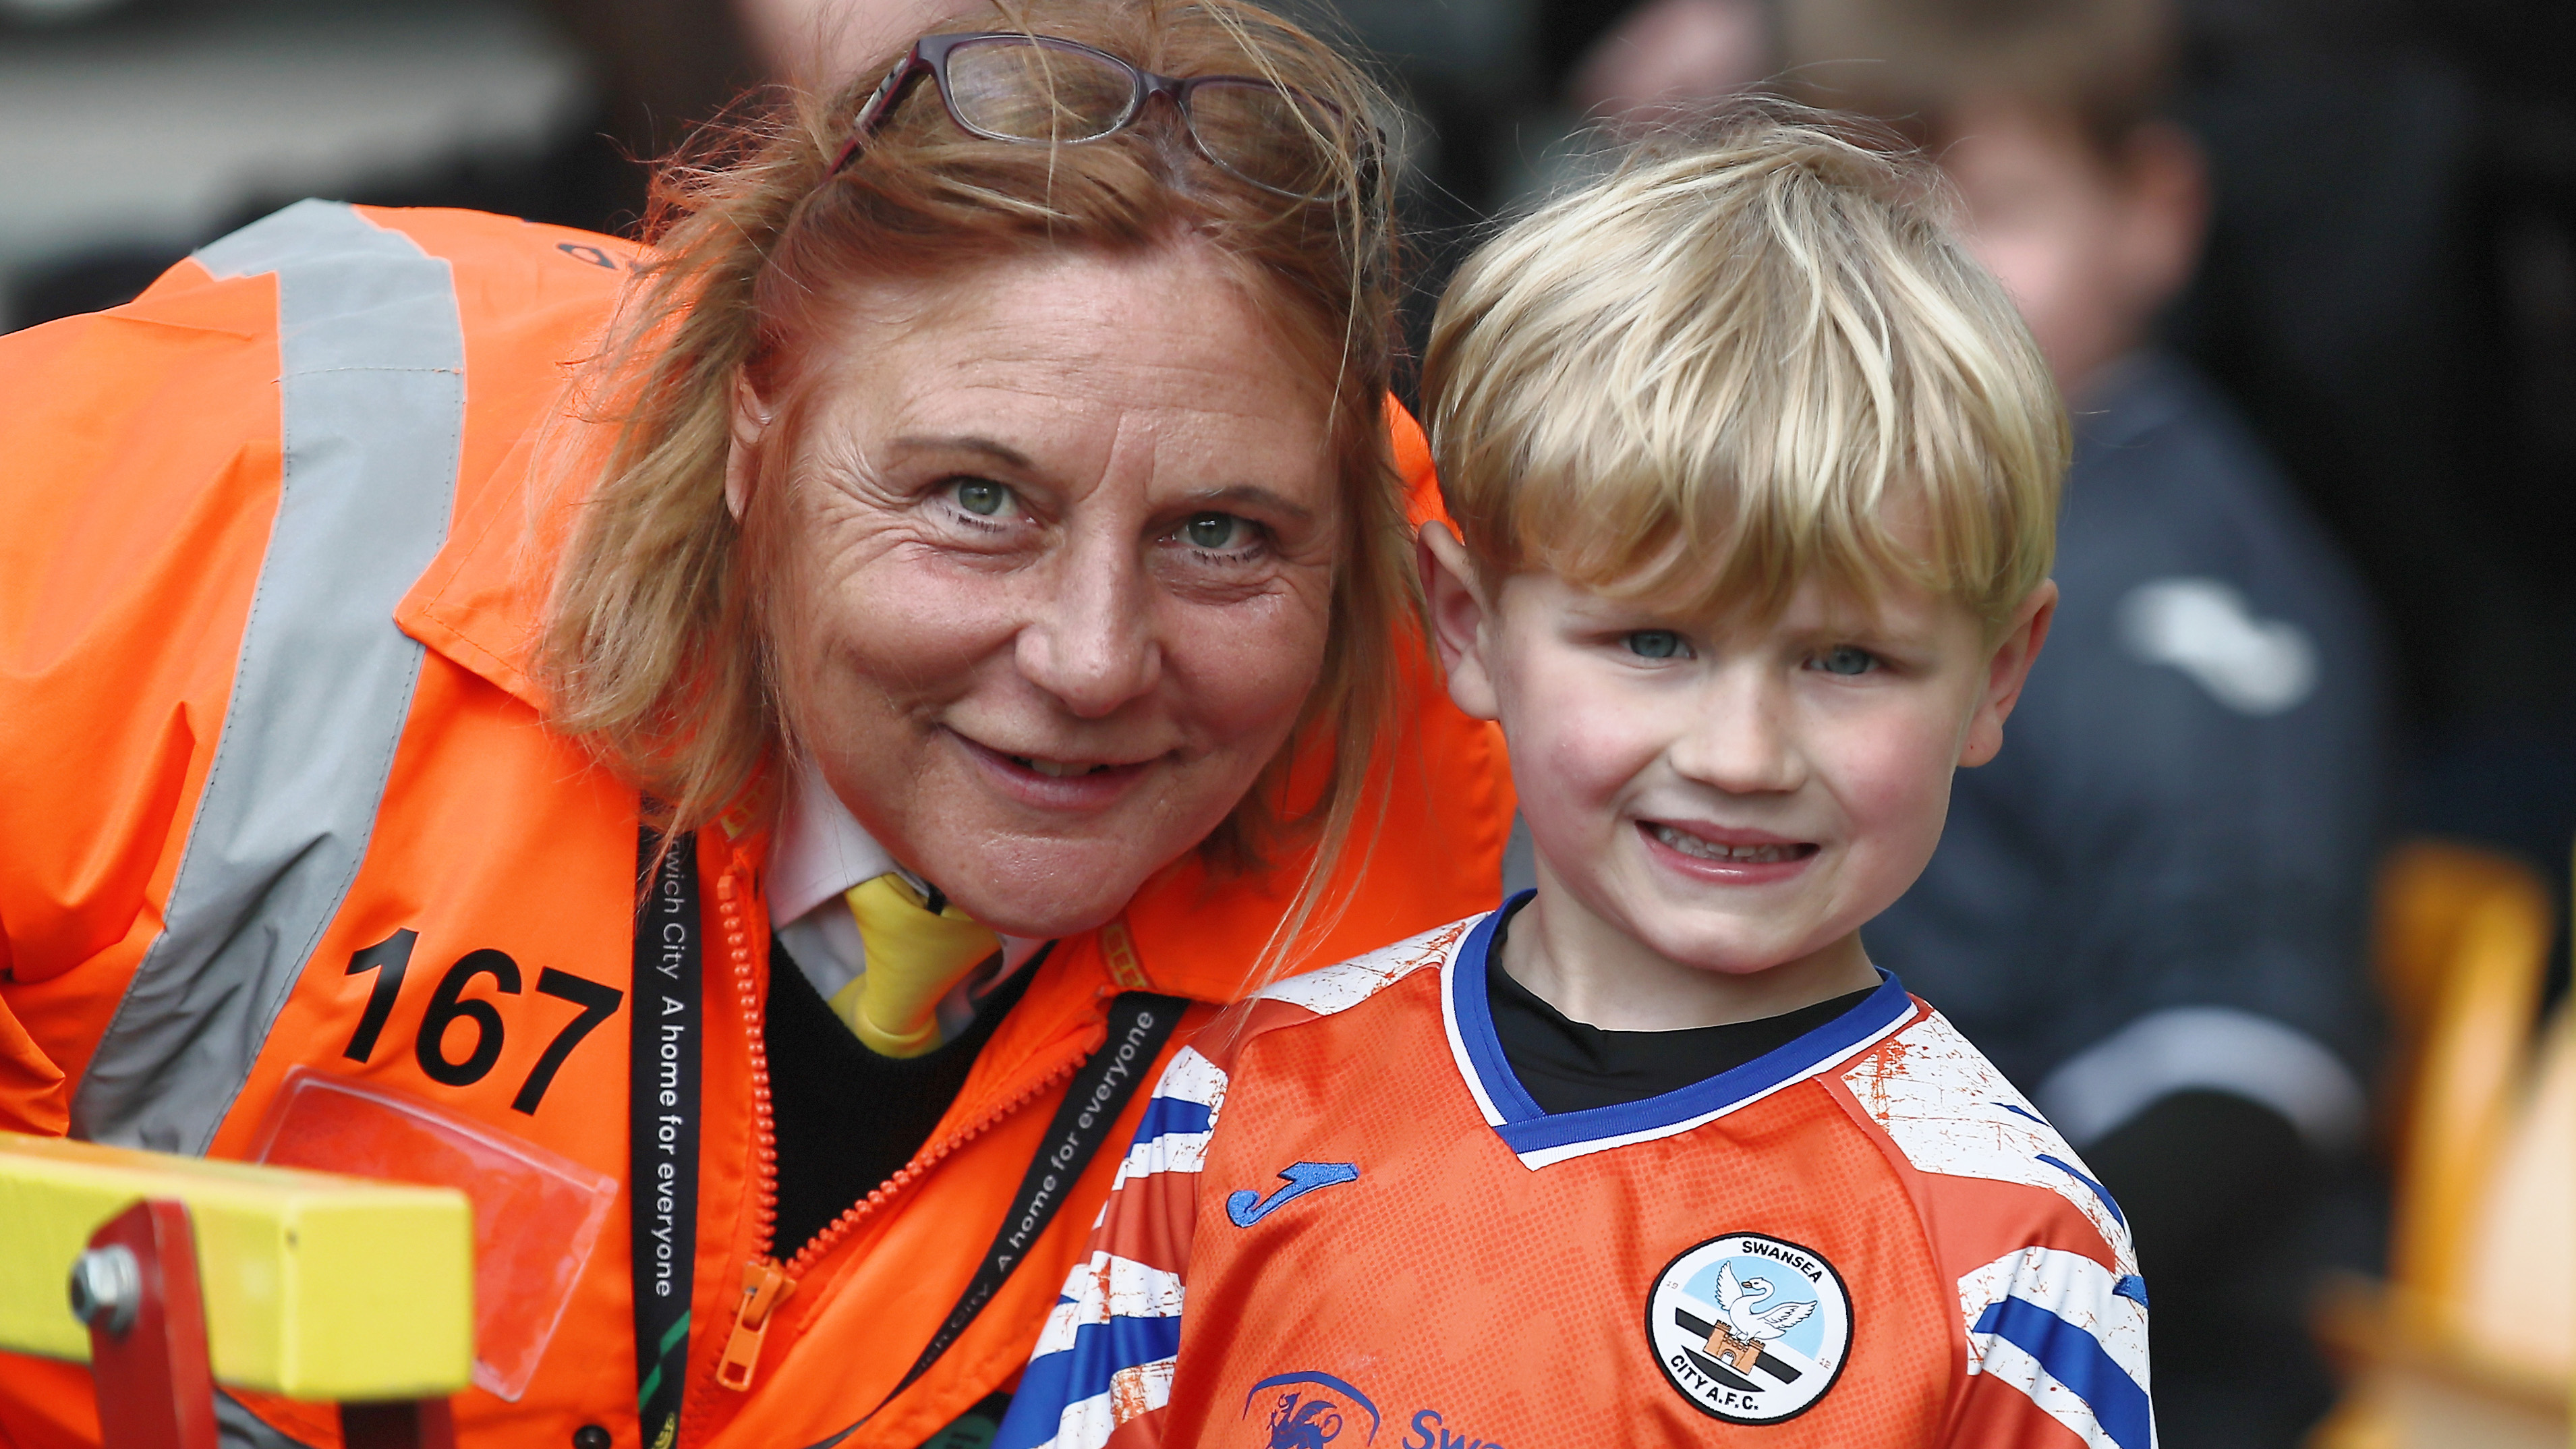 Steward and young fan